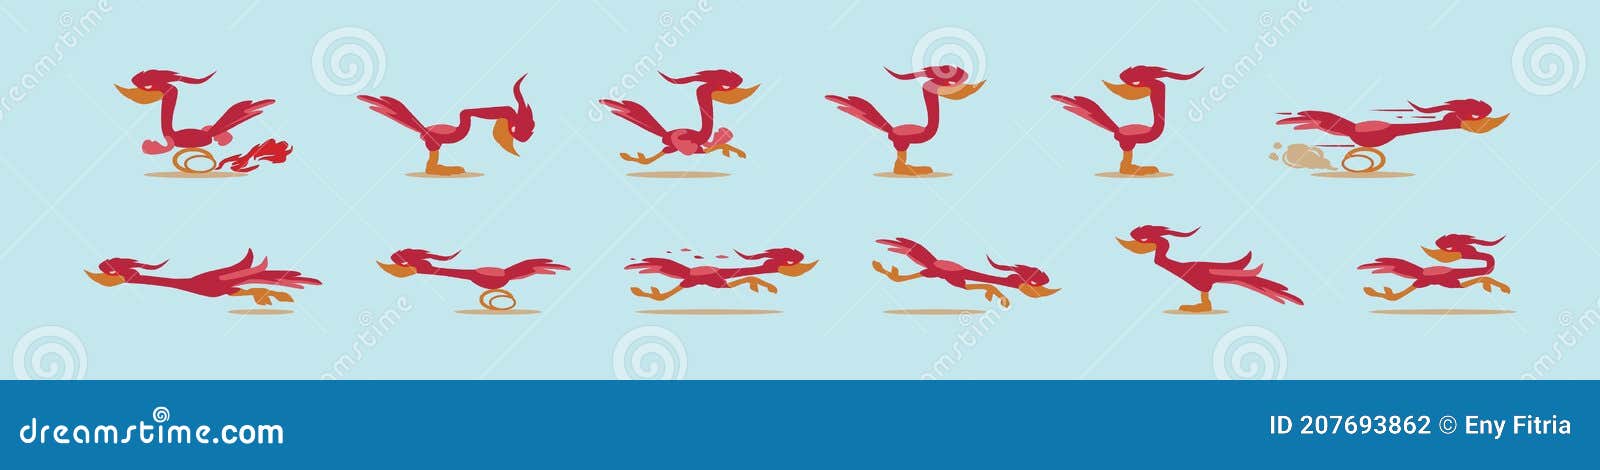 set of roadrunner cartoon icon  template with various models.    on blue background